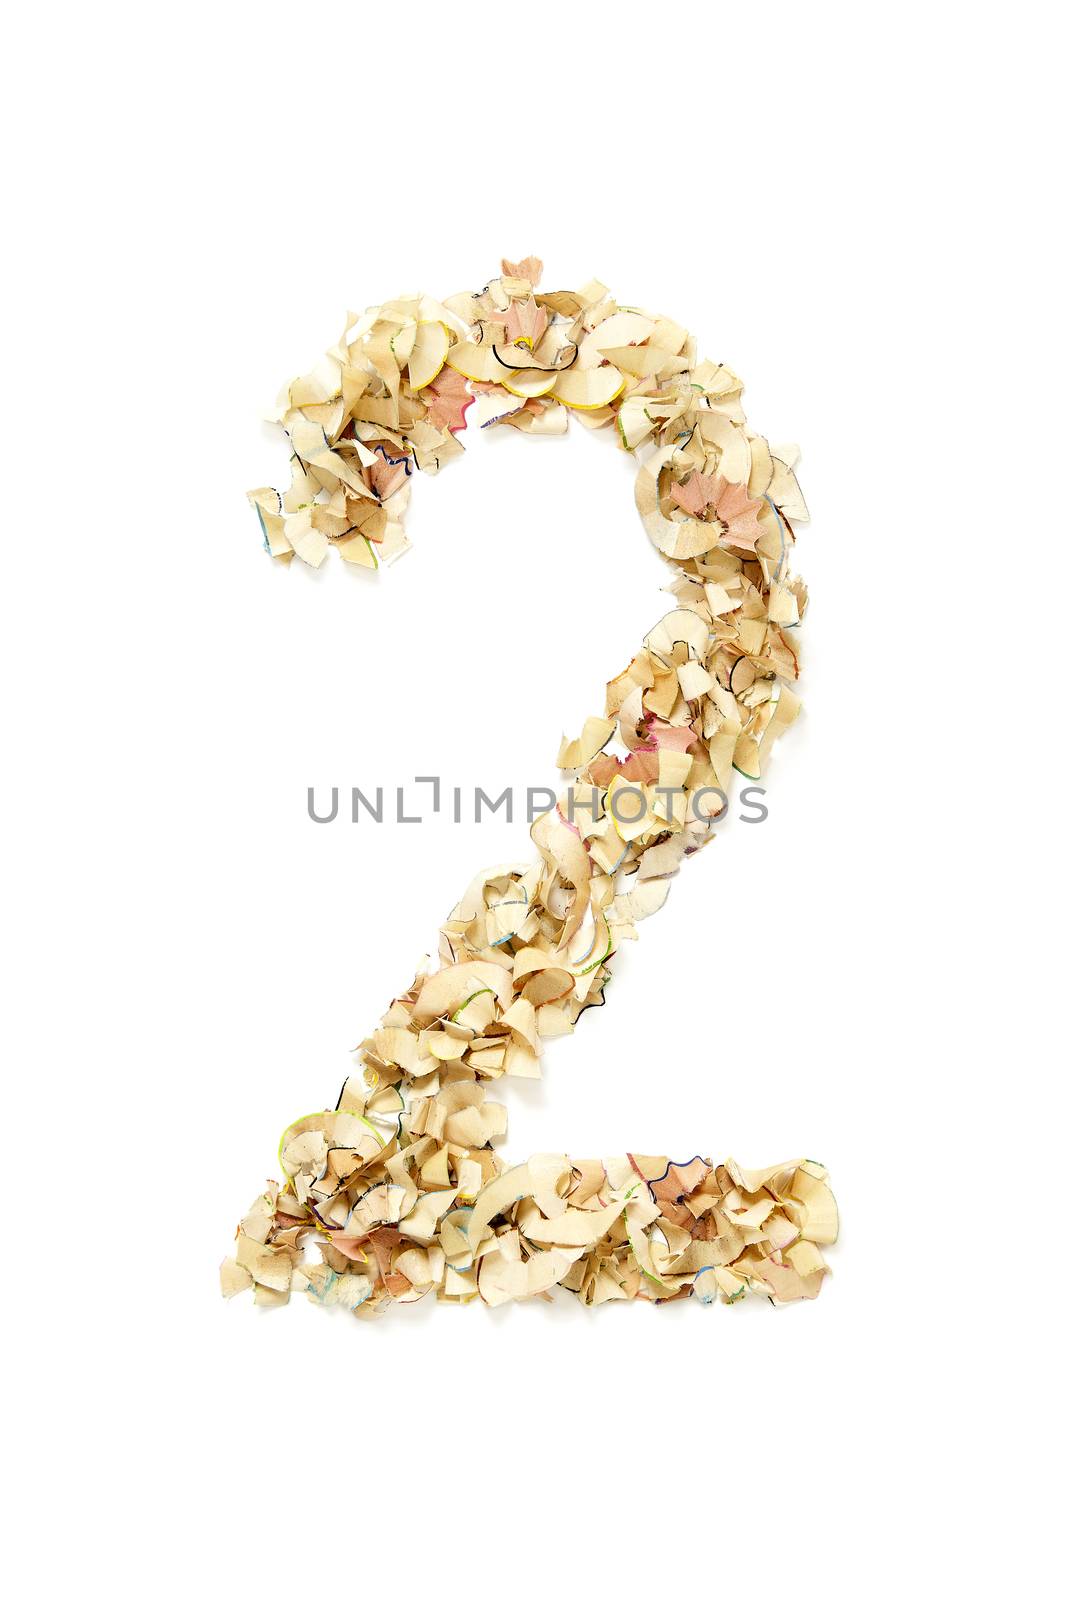 Number 7 made of pencil shavings for your project.